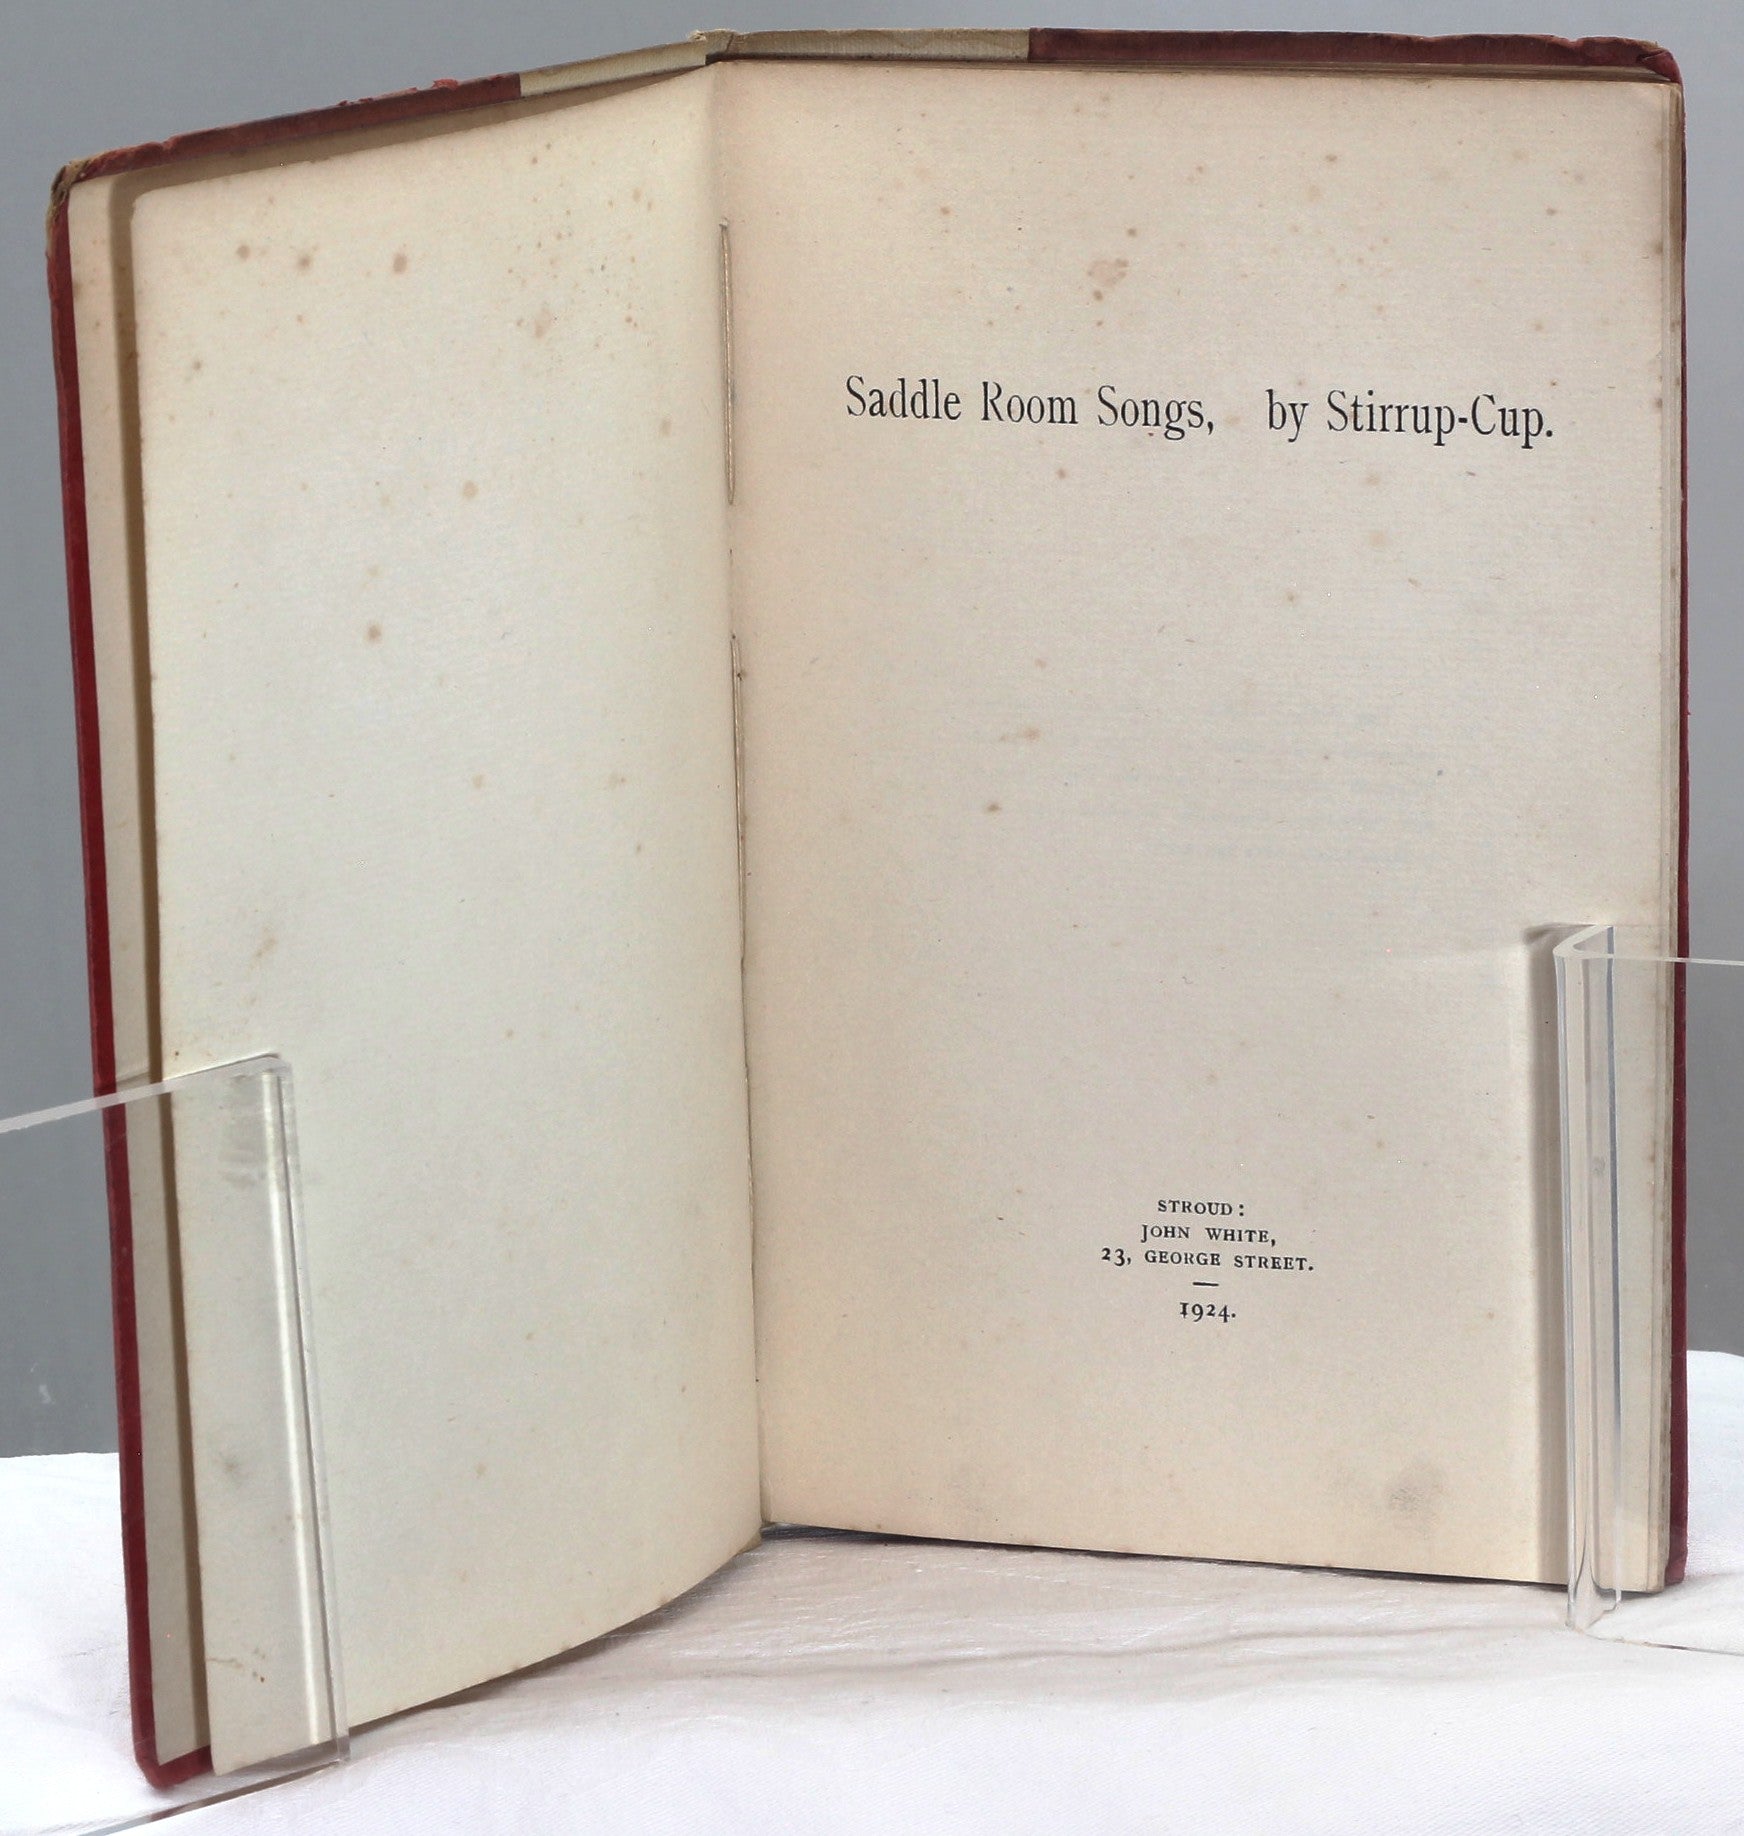 Saddle Room Songs by Stirrup Cup, 1924